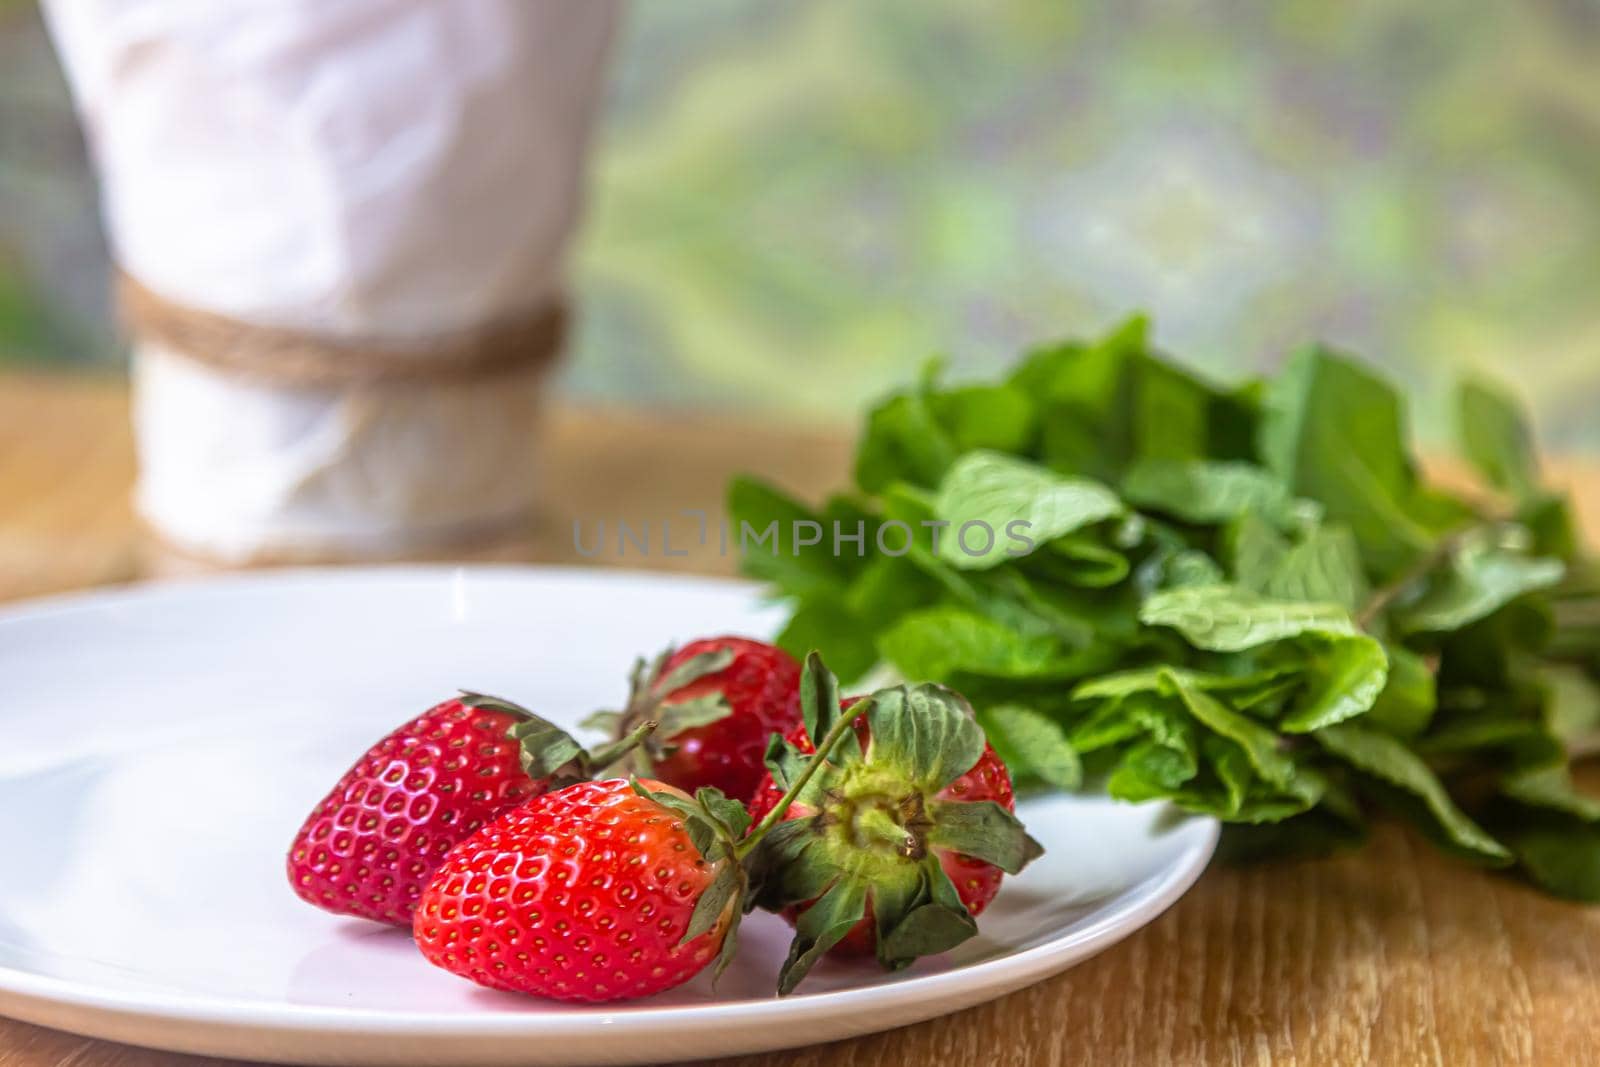 Fresh strawberries and mint - Ingredients for making healthy smoothie or summer drink cocktail. Closeup view.